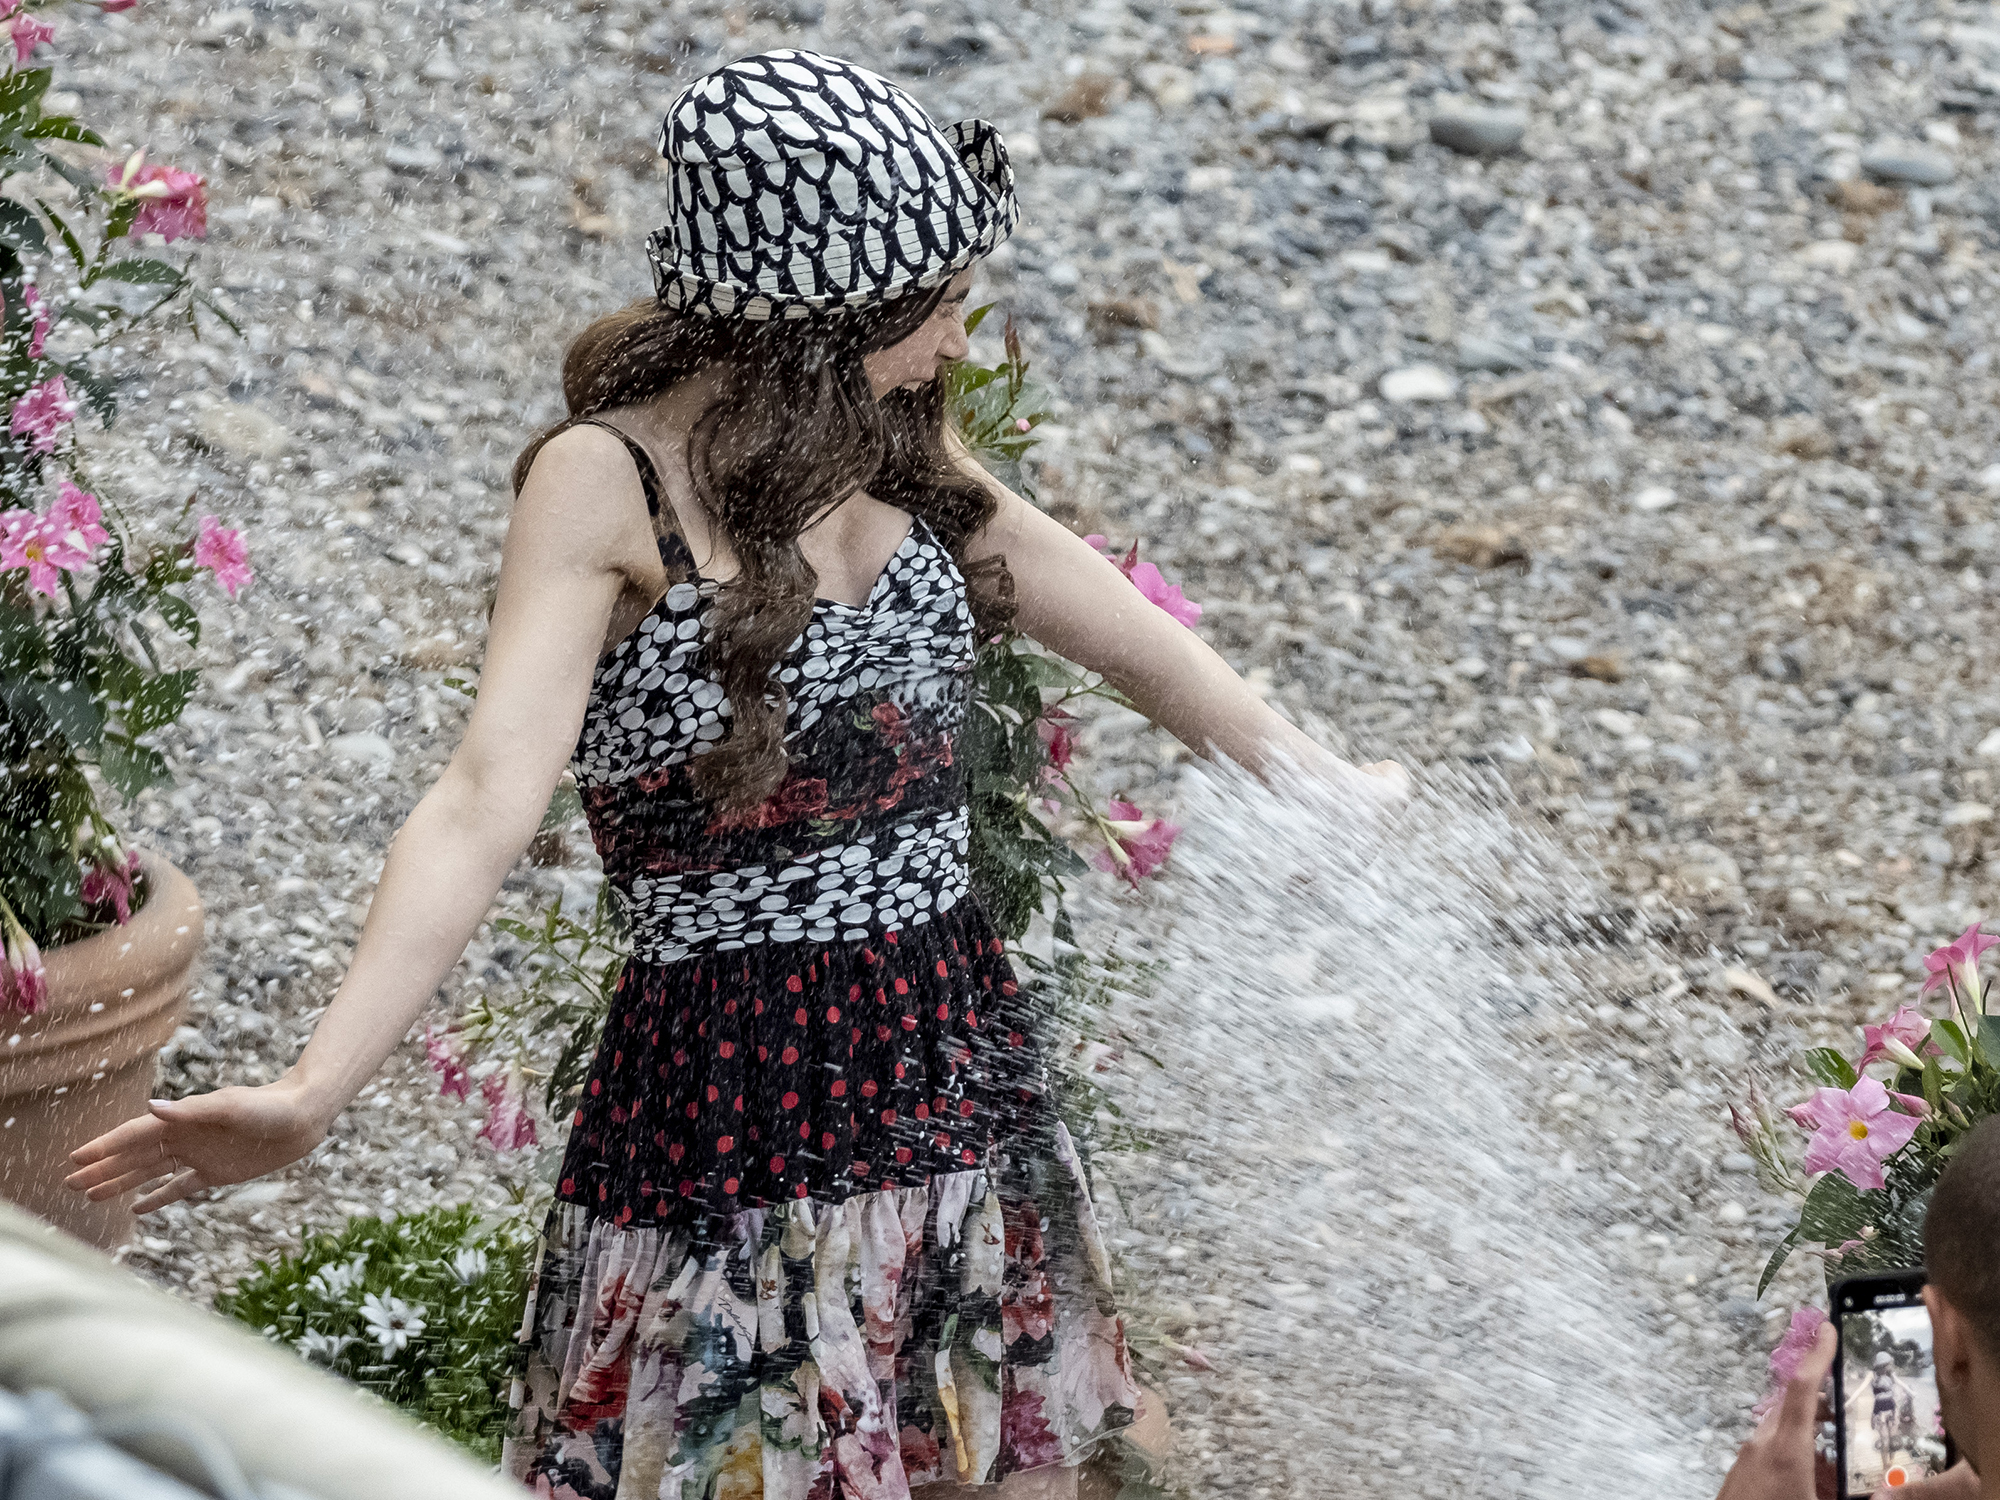 Actress Lily Collins gets sprayed with water on the set of Emily in Paris in Saint-Jean-Cap-Ferrat, France. 